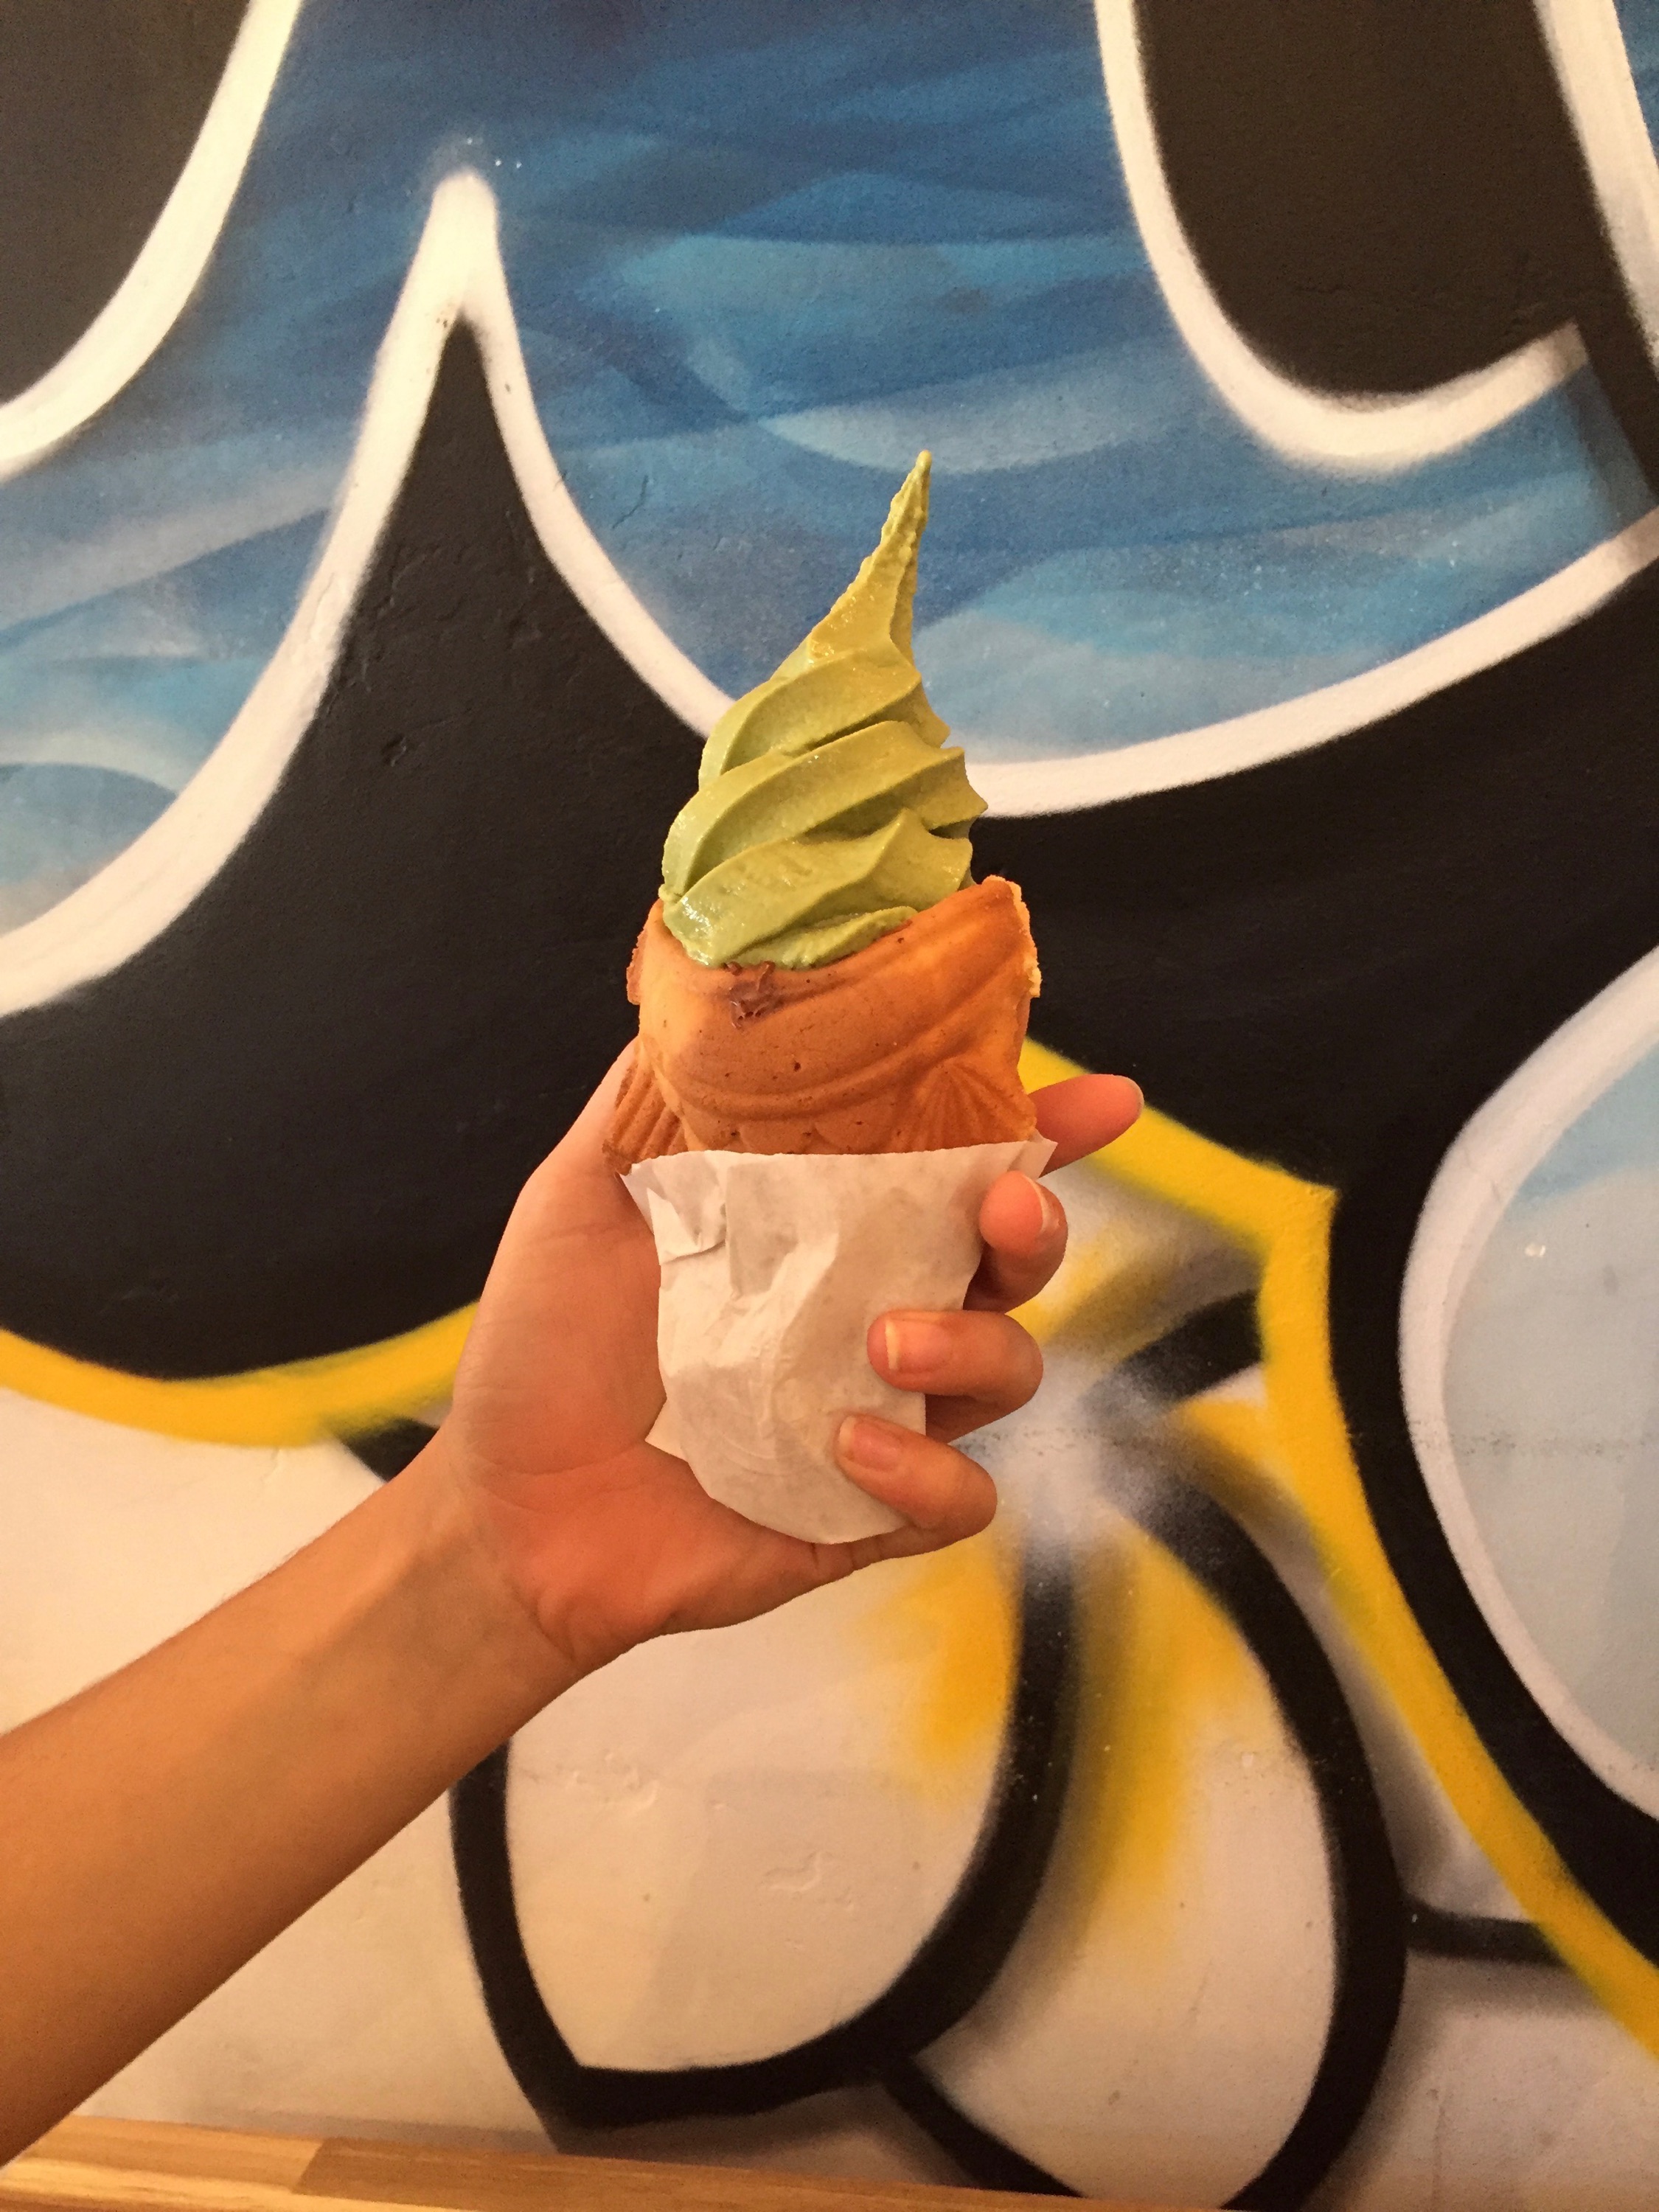 Uji Time matcha ice cream against colorful wall.